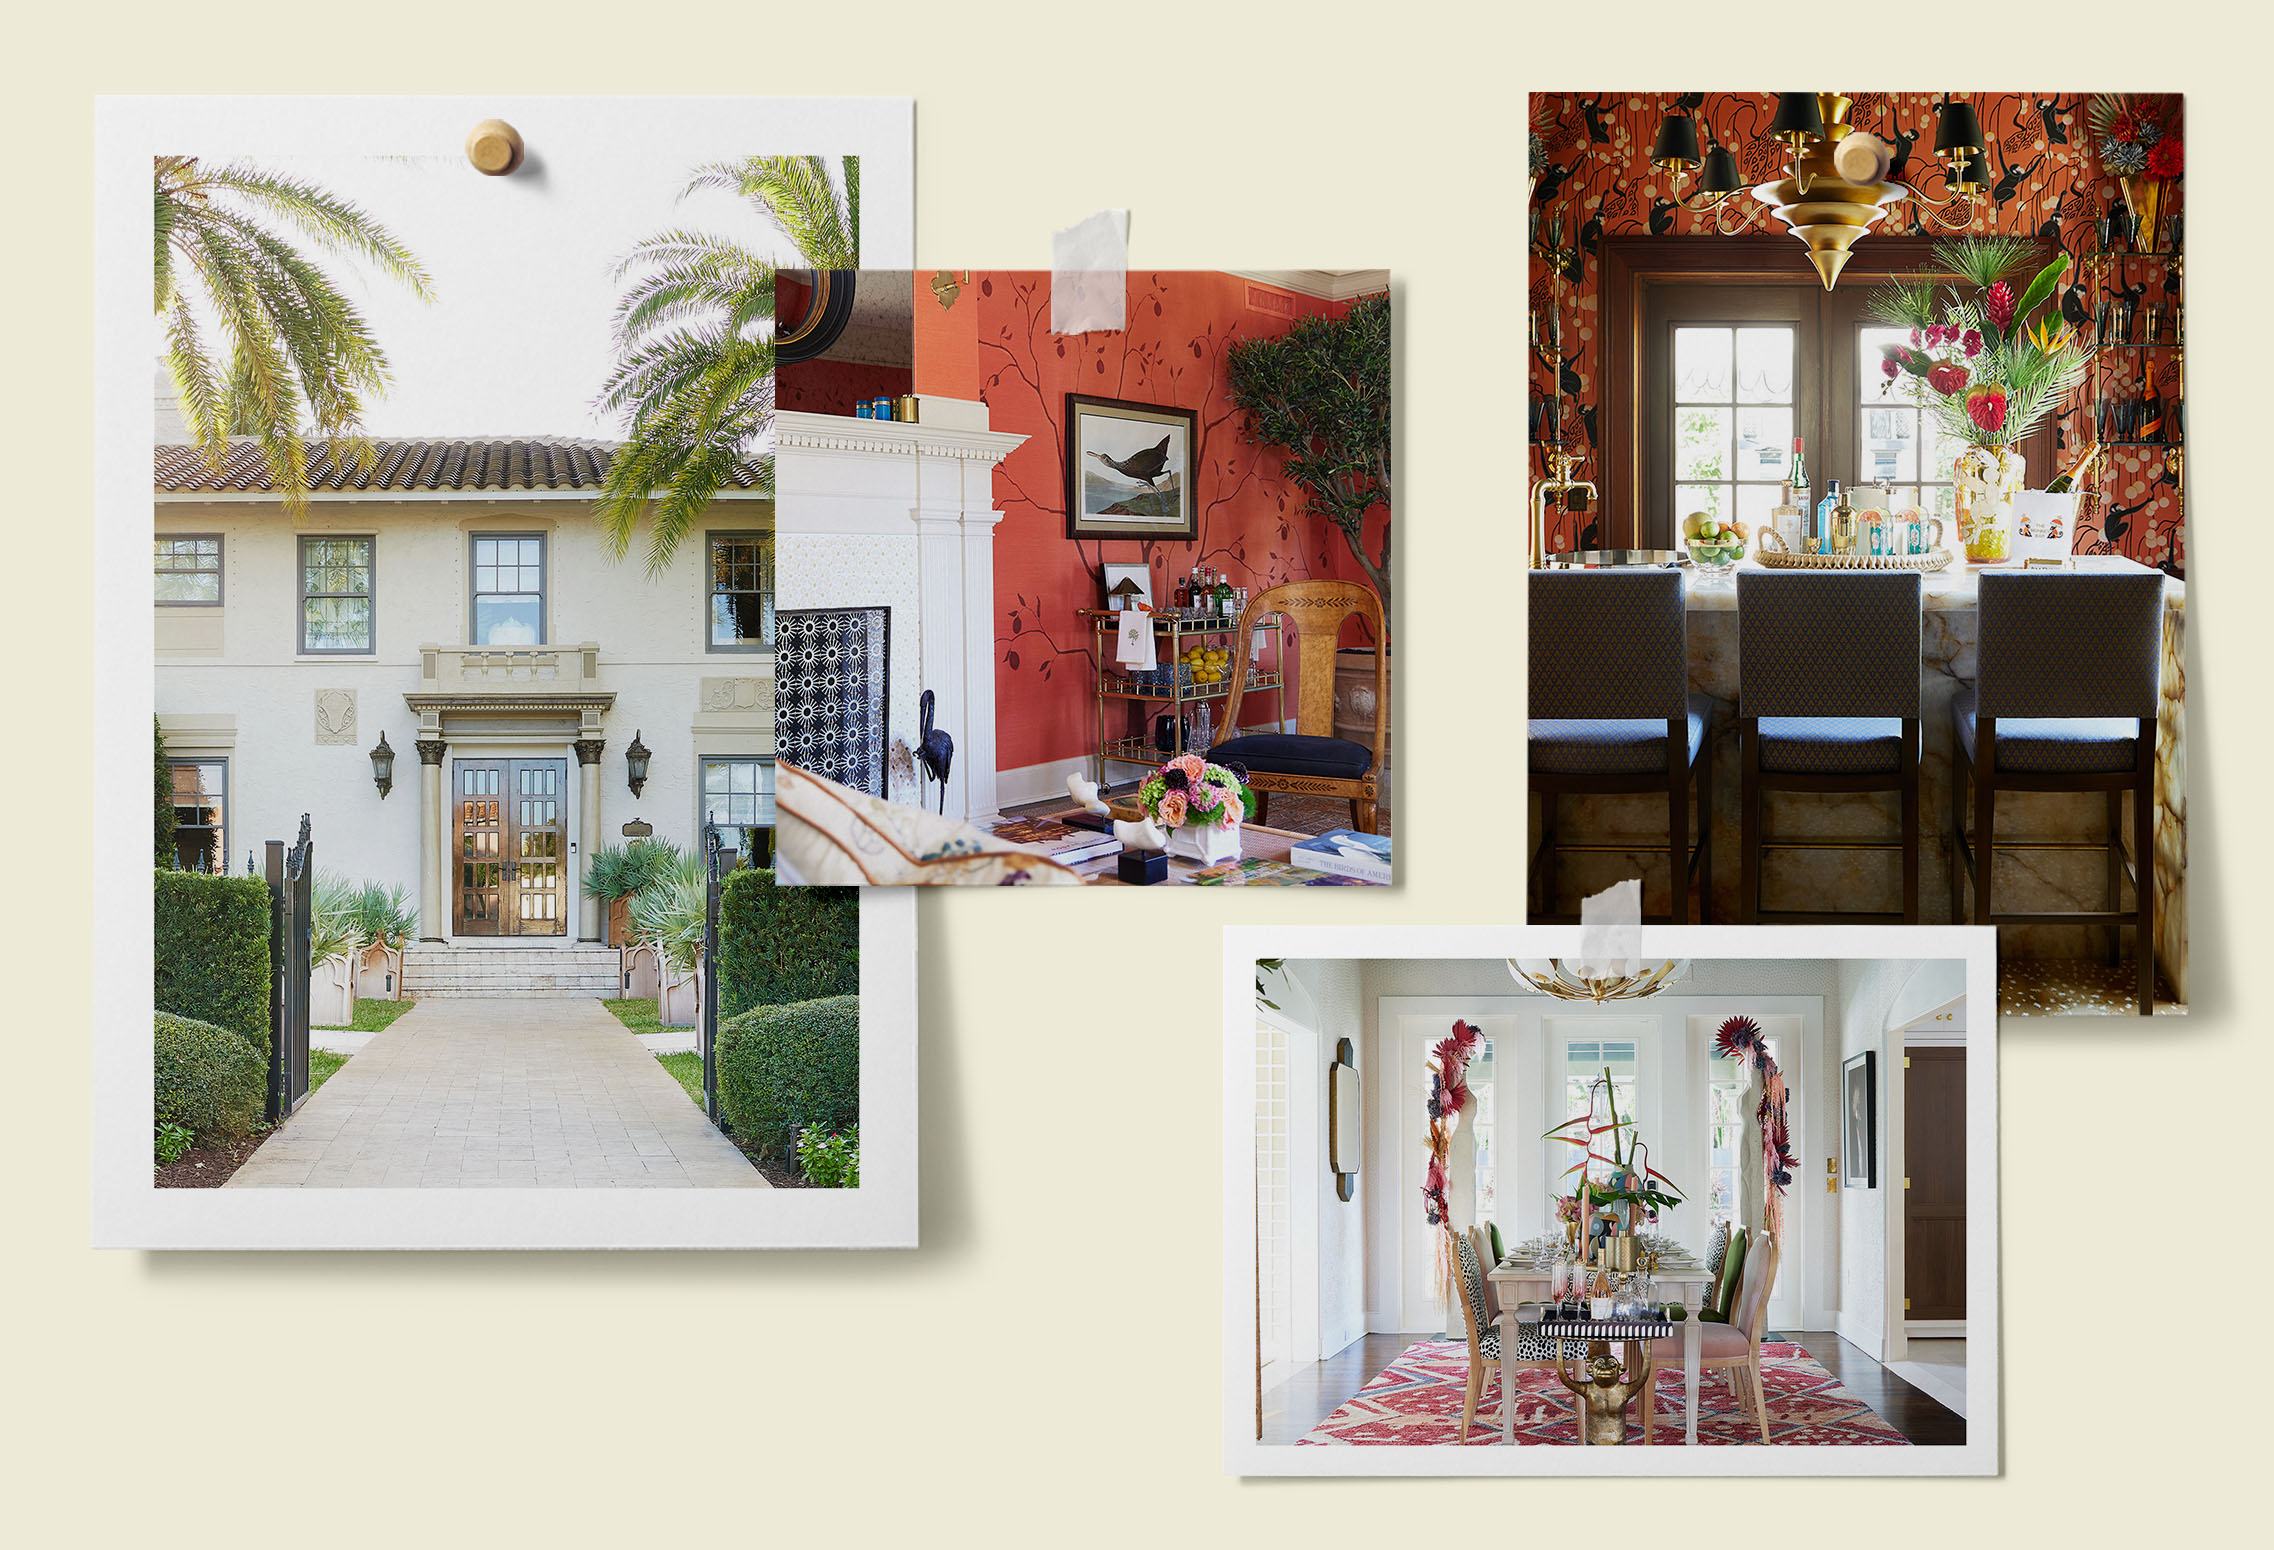 A selection of images showing interior designs at Kips Bay Palm Beach Show House